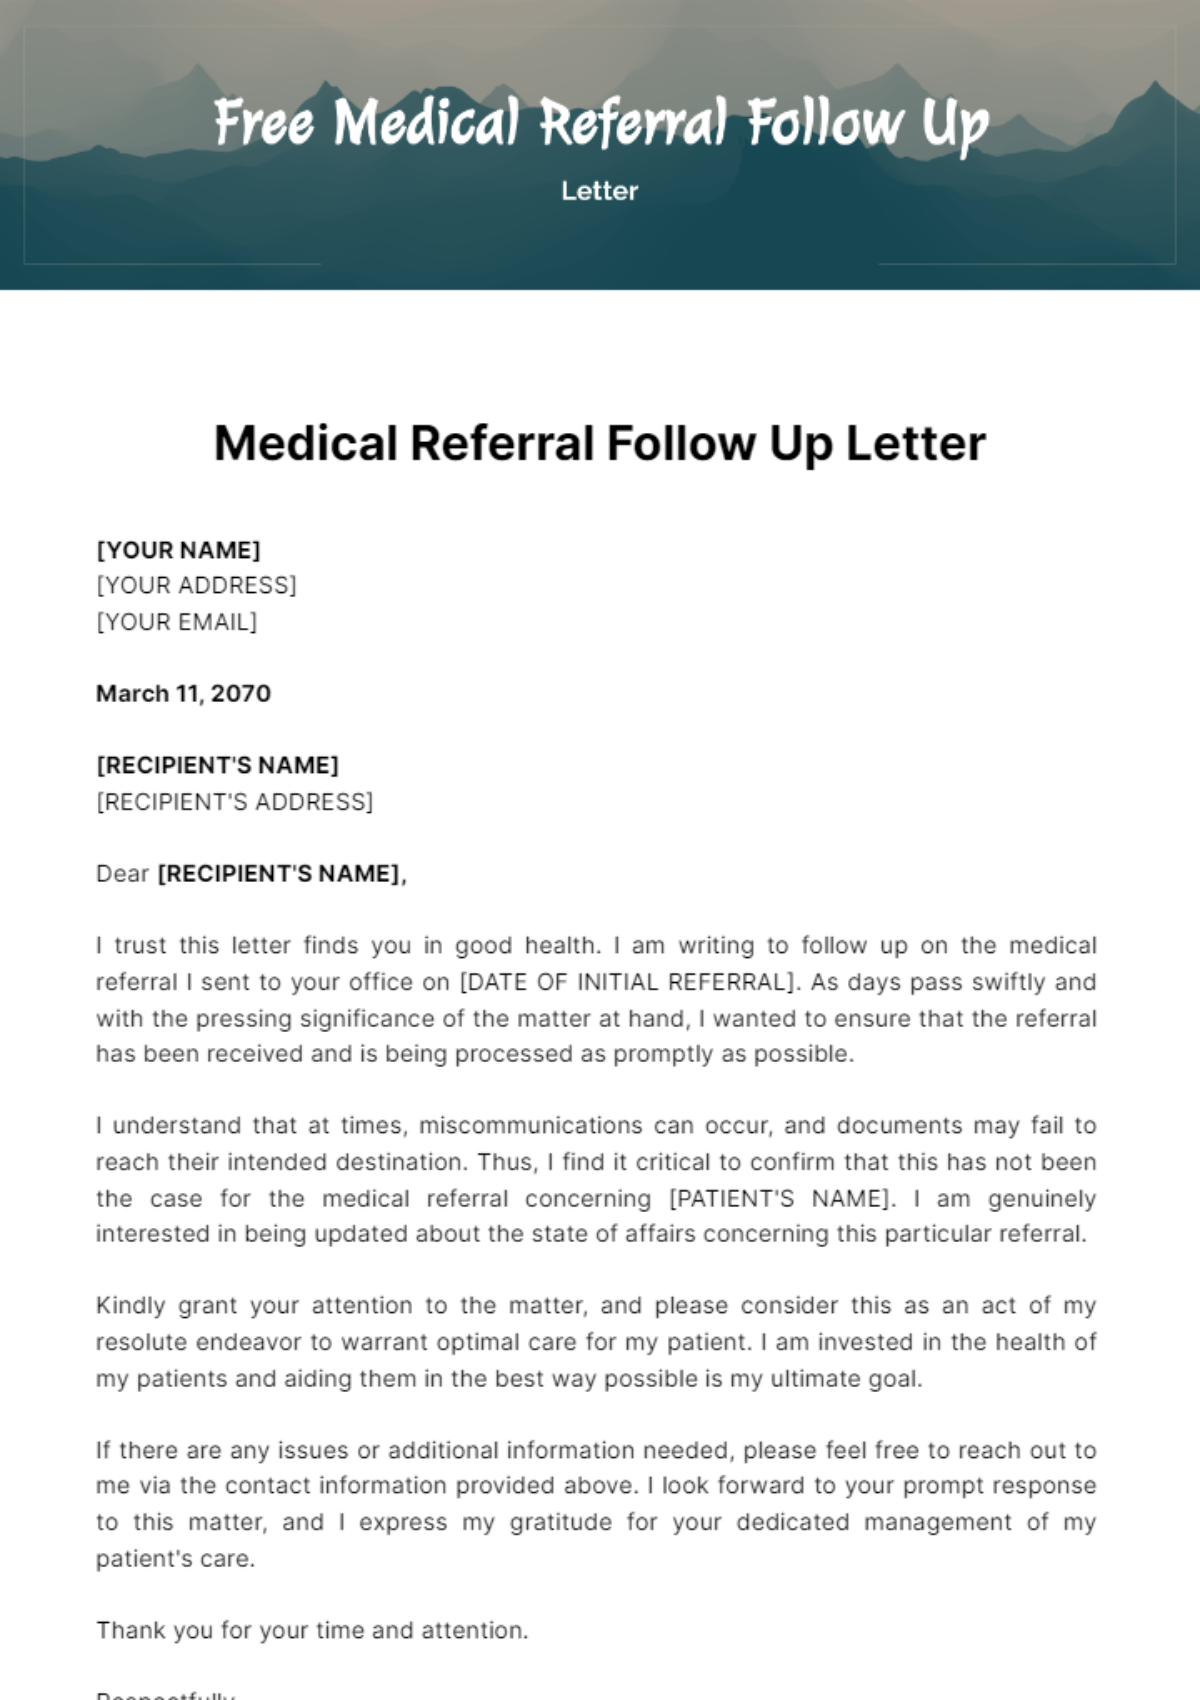 Free Medical Referral Follow Up Letter Template